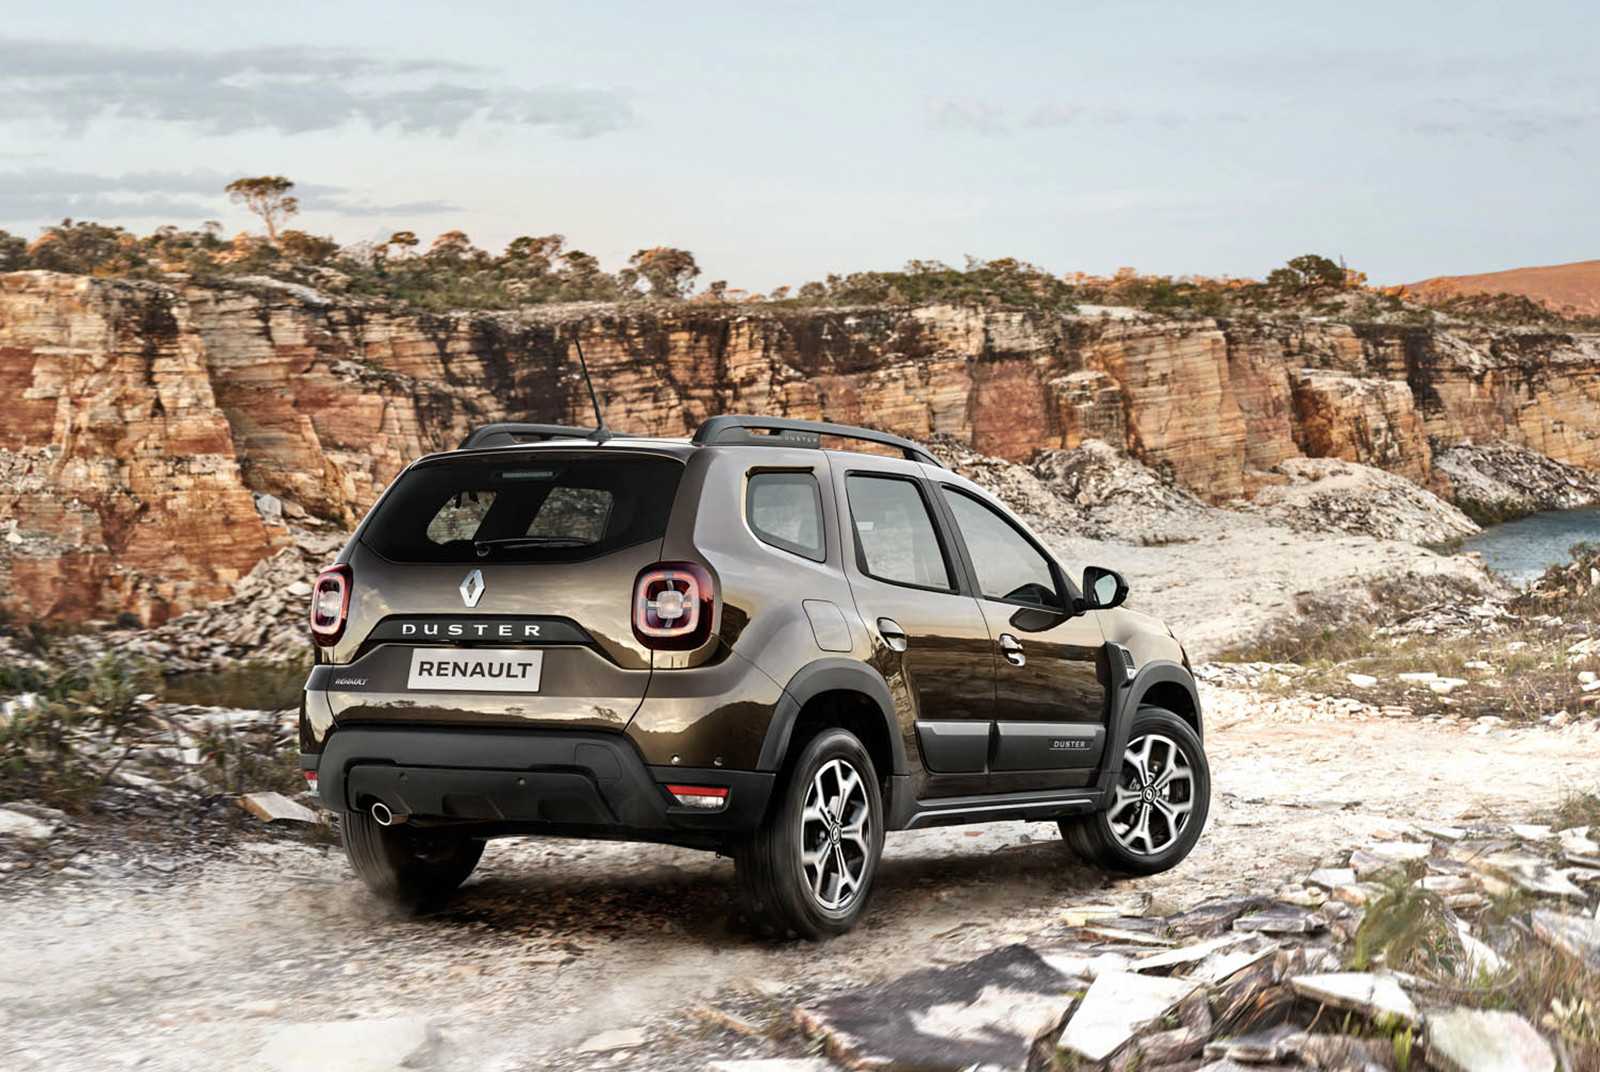 Рено дастер 2021 2.0. Renault Duster 2. Duster 2021. Рено Дастер 2021г. Новый Renault Duster.